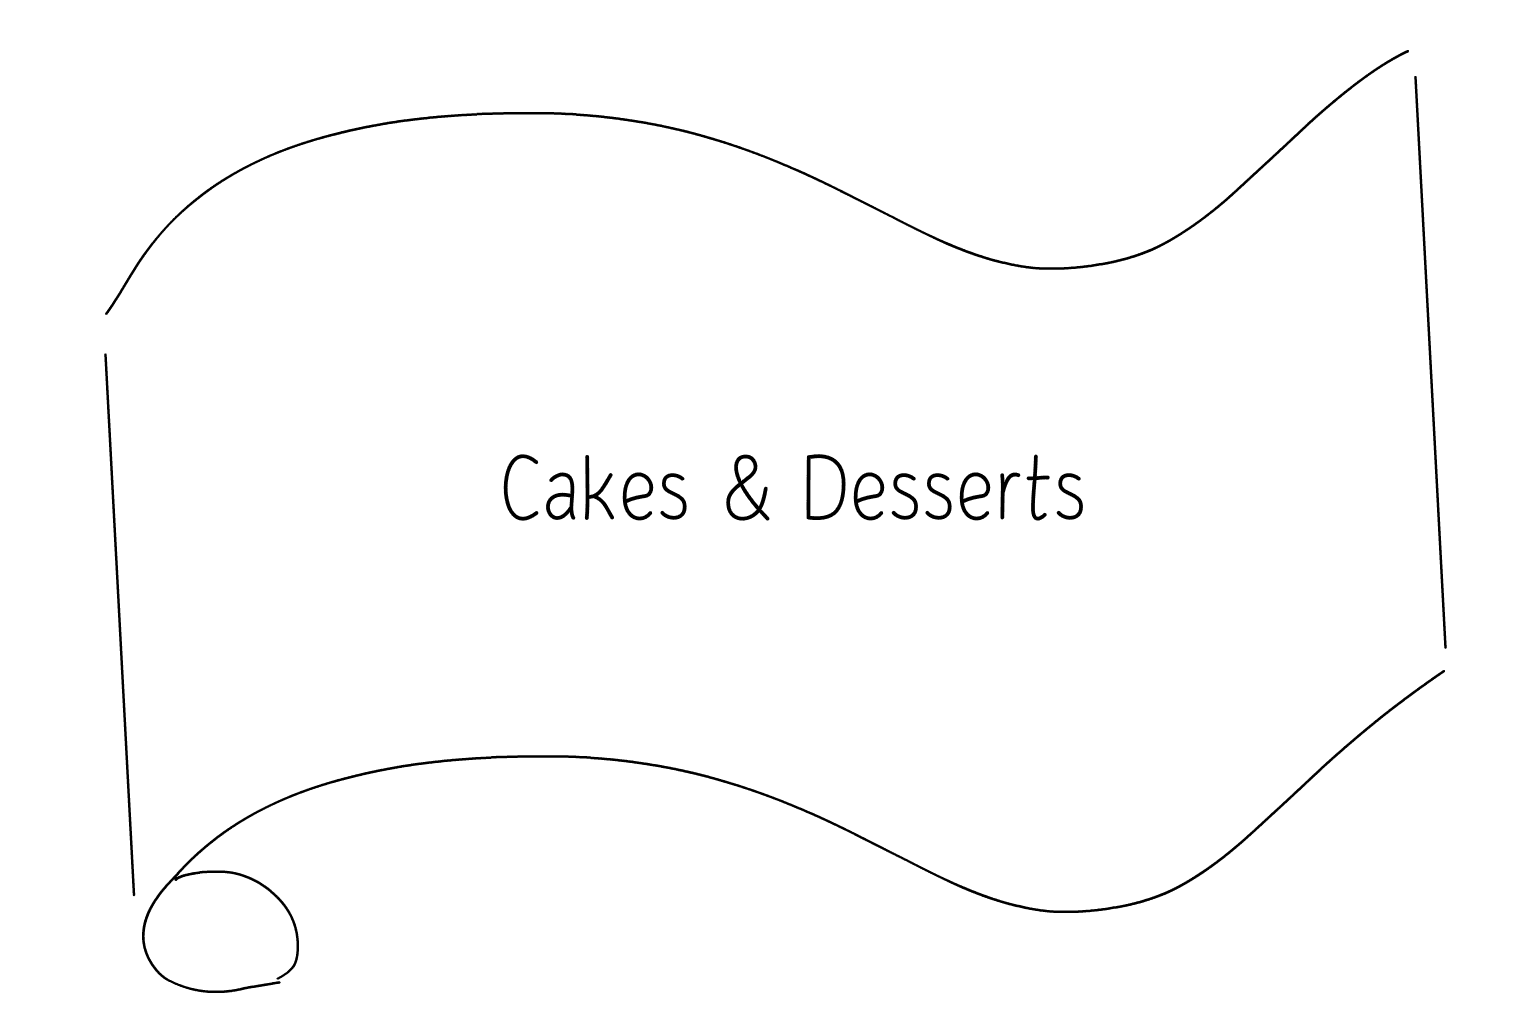 Illustration of Wedding Cakes and Desserts